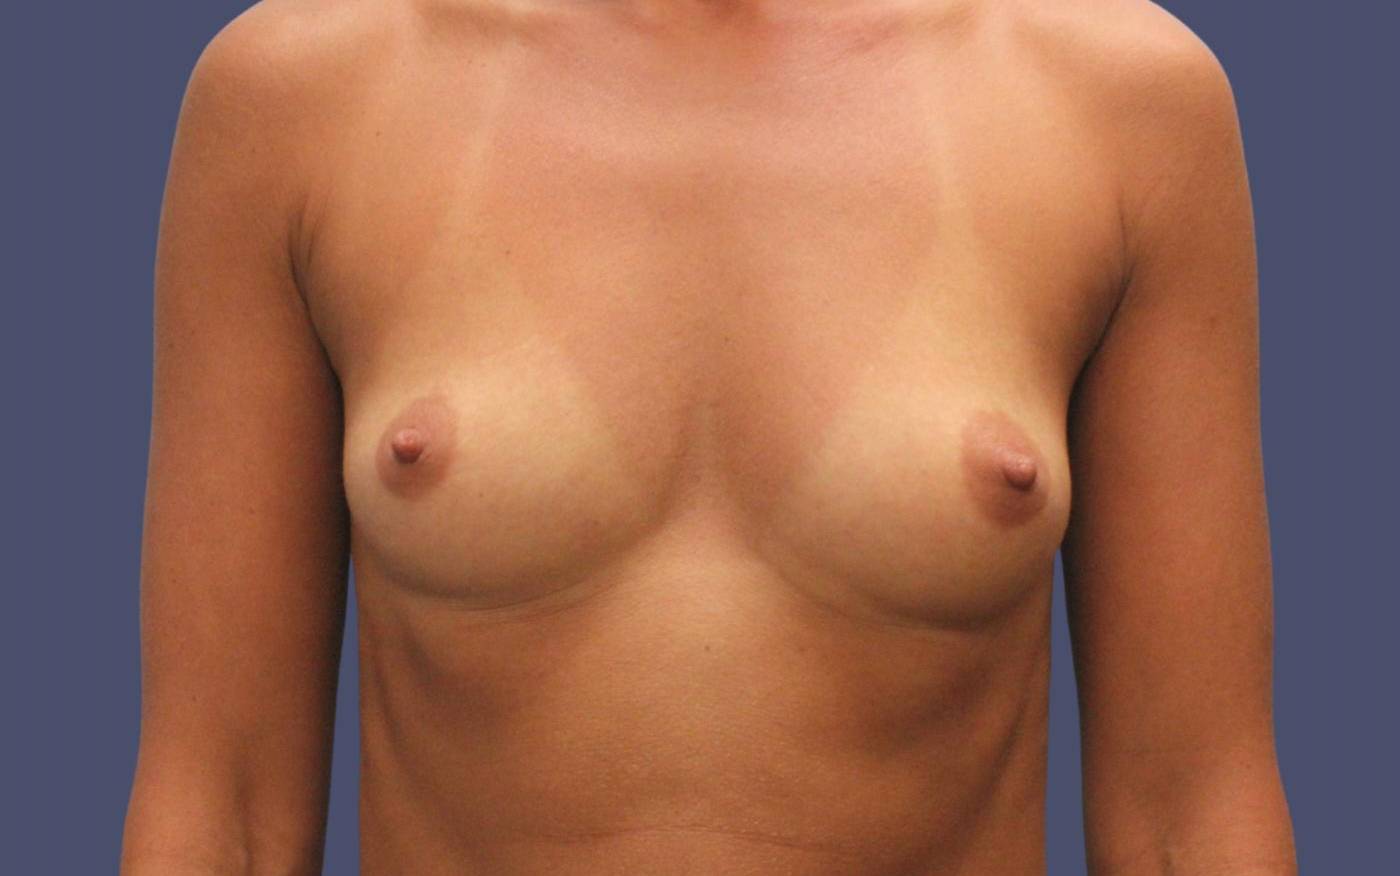 Breast Augmentation 11 Before